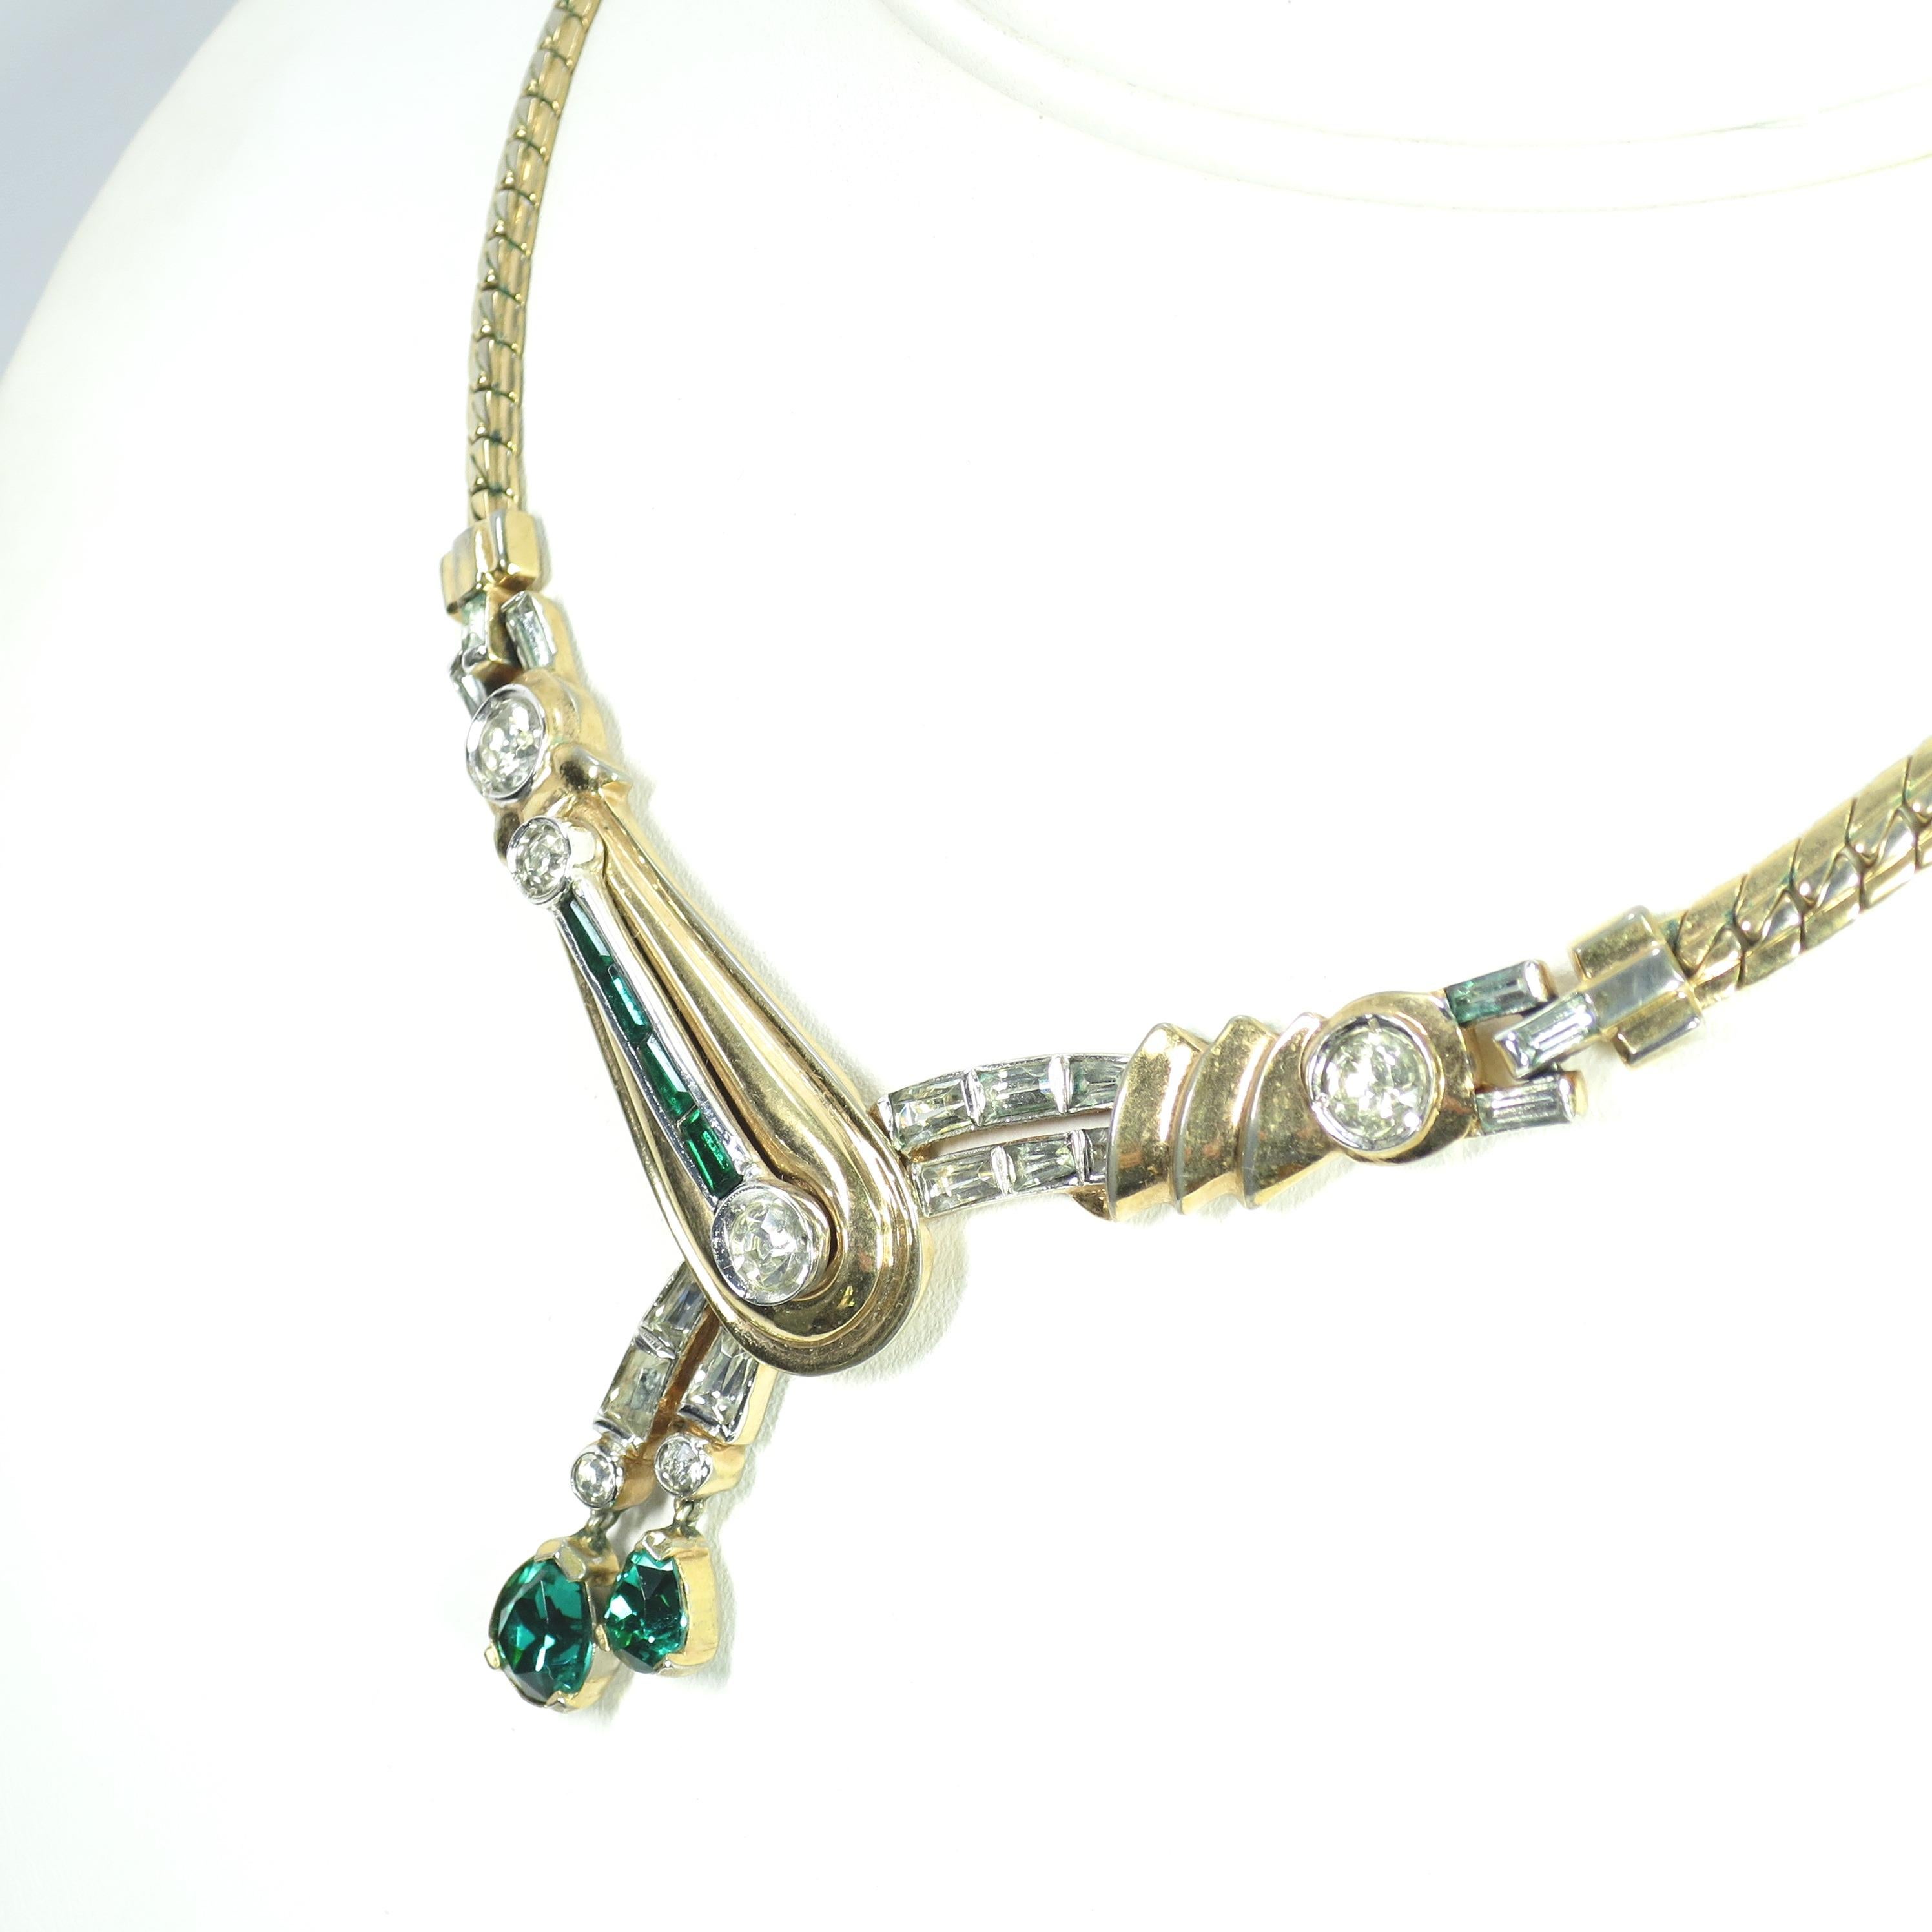 Mazer Bros. Gold & Rhodium Emerald Asymmetrical Necklace & Earrings Set, 1940s In Good Condition For Sale In Burbank, CA